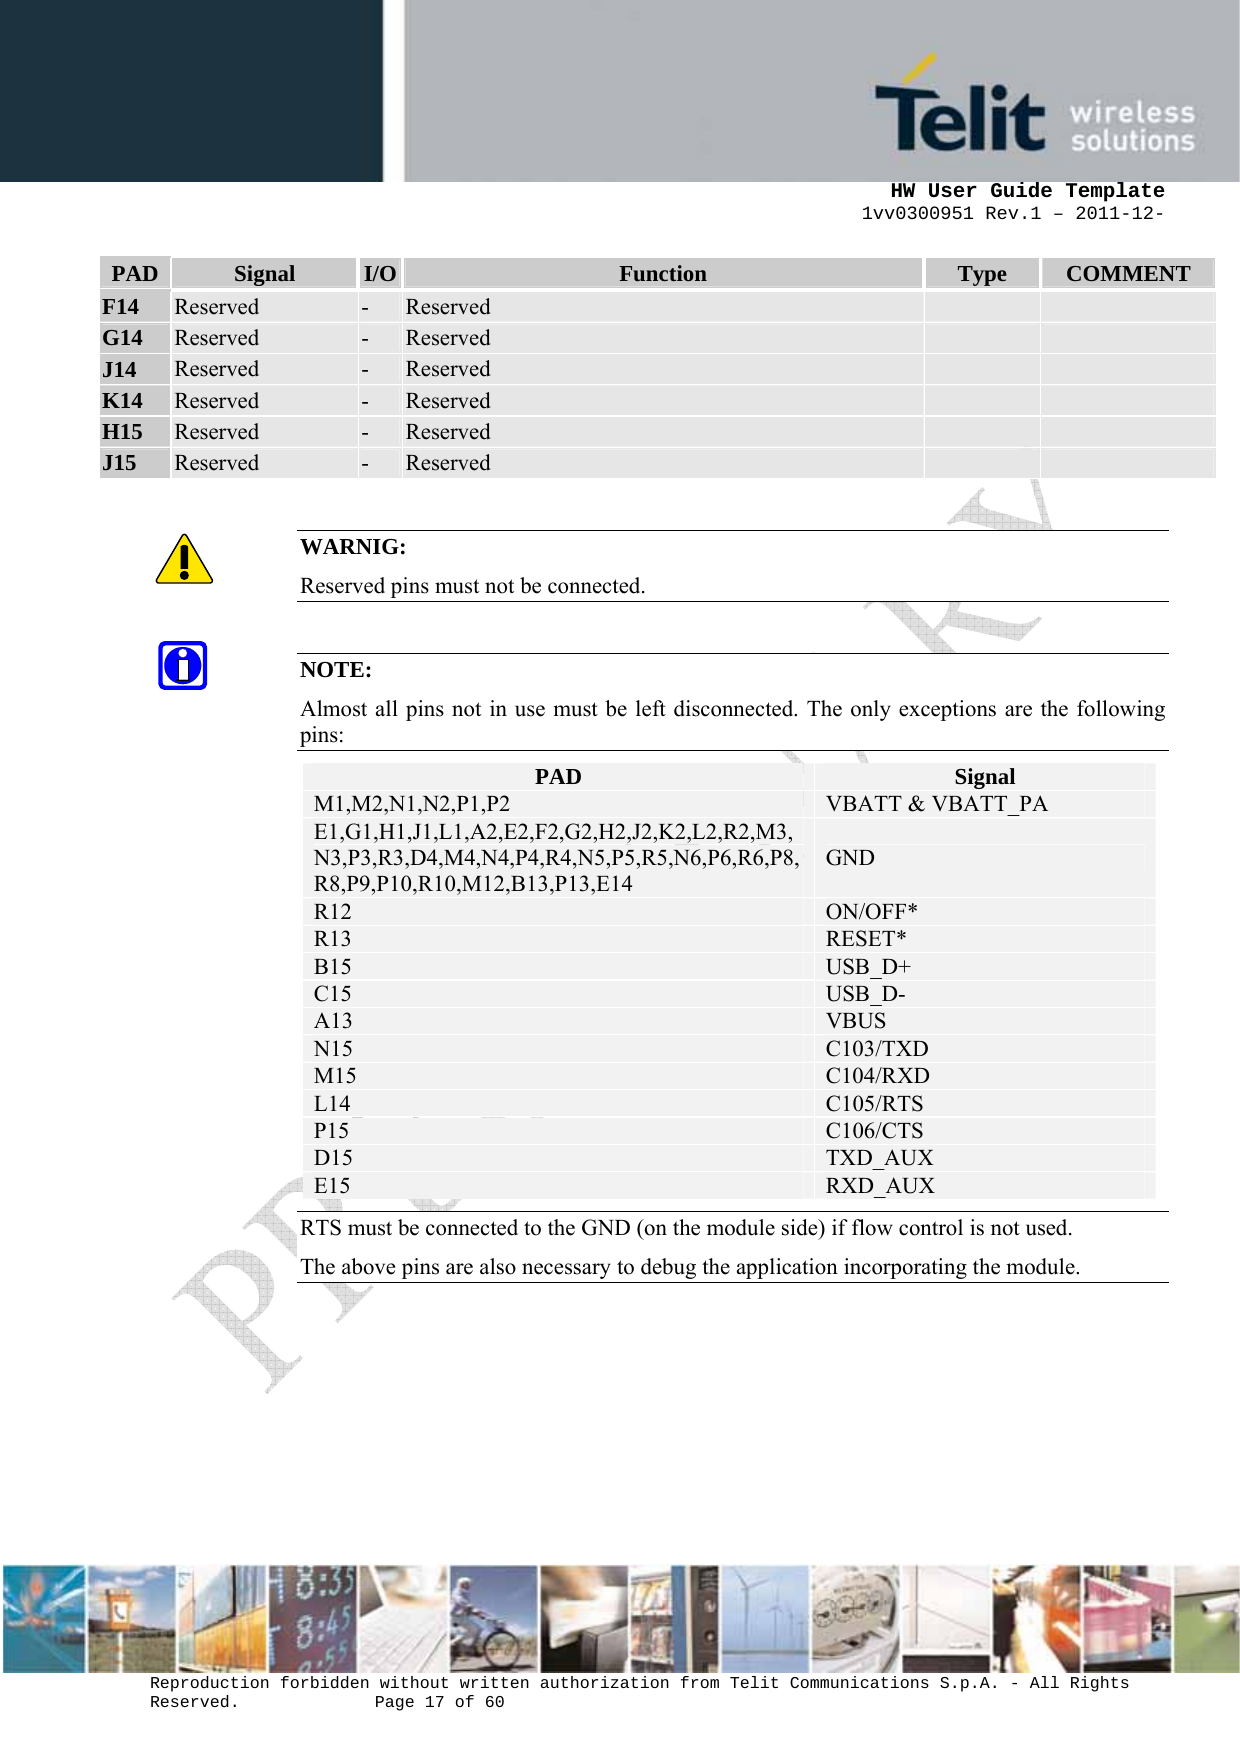      HW User Guide Template 1vv0300951 Rev.1 – 2011-12-  Reproduction forbidden without written authorization from Telit Communications S.p.A. - All Rights Reserved.    Page 17 of 60                                                     PAD  Signal  I/O  Function  Type  COMMENT F14  Reserved  -  Reserved     G14  Reserved  -  Reserved     J14  Reserved  -  Reserved     K14  Reserved  -  Reserved     H15  Reserved  -  Reserved     J15  Reserved  -  Reserved      WARNIG: Reserved pins must not be connected.  NOTE: Almost all pins not in use must be left disconnected. The only exceptions are the following pins: PAD  Signal M1,M2,N1,N2,P1,P2  VBATT &amp; VBATT_PA E1,G1,H1,J1,L1,A2,E2,F2,G2,H2,J2,K2,L2,R2,M3,N3,P3,R3,D4,M4,N4,P4,R4,N5,P5,R5,N6,P6,R6,P8,R8,P9,P10,R10,M12,B13,P13,E14 GND R12  ON/OFF* R13  RESET* B15  USB_D+ C15  USB_D- A13  VBUS N15  C103/TXD M15  C104/RXD L14  C105/RTS P15  C106/CTS D15  TXD_AUX E15  RXD_AUX RTS must be connected to the GND (on the module side) if flow control is not used. The above pins are also necessary to debug the application incorporating the module.  